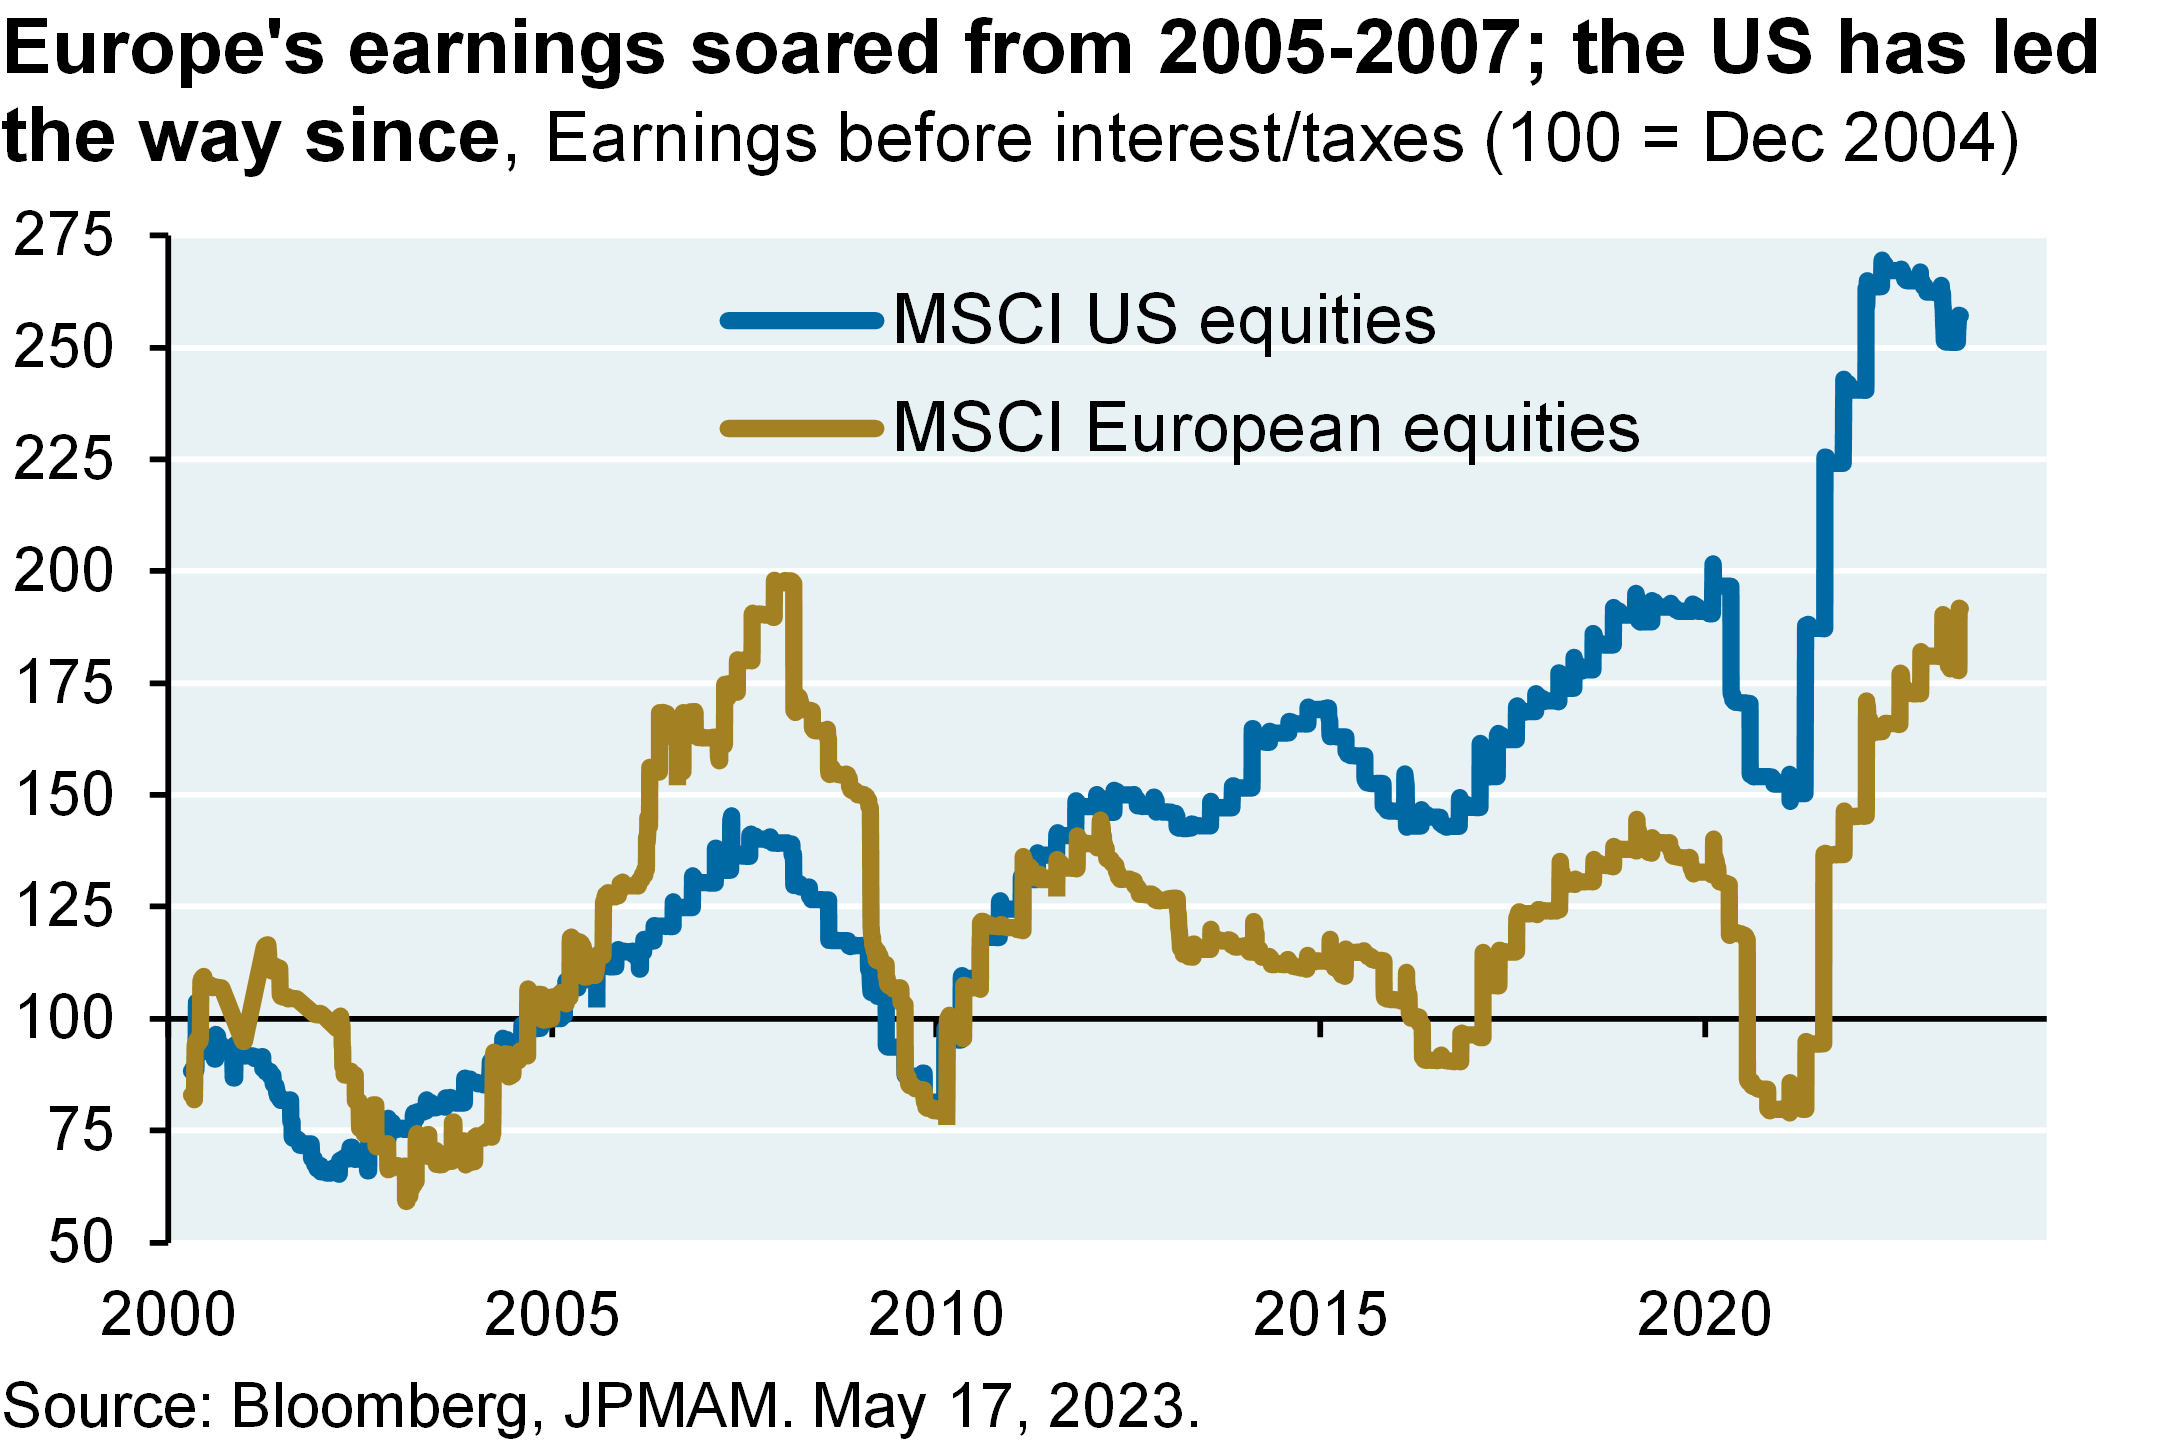 Line chart shows earnings before interest and taxes for both MSCI US equities and MSCI European equities since 2000. Since 2010, US earnings have outperformed European earnings.